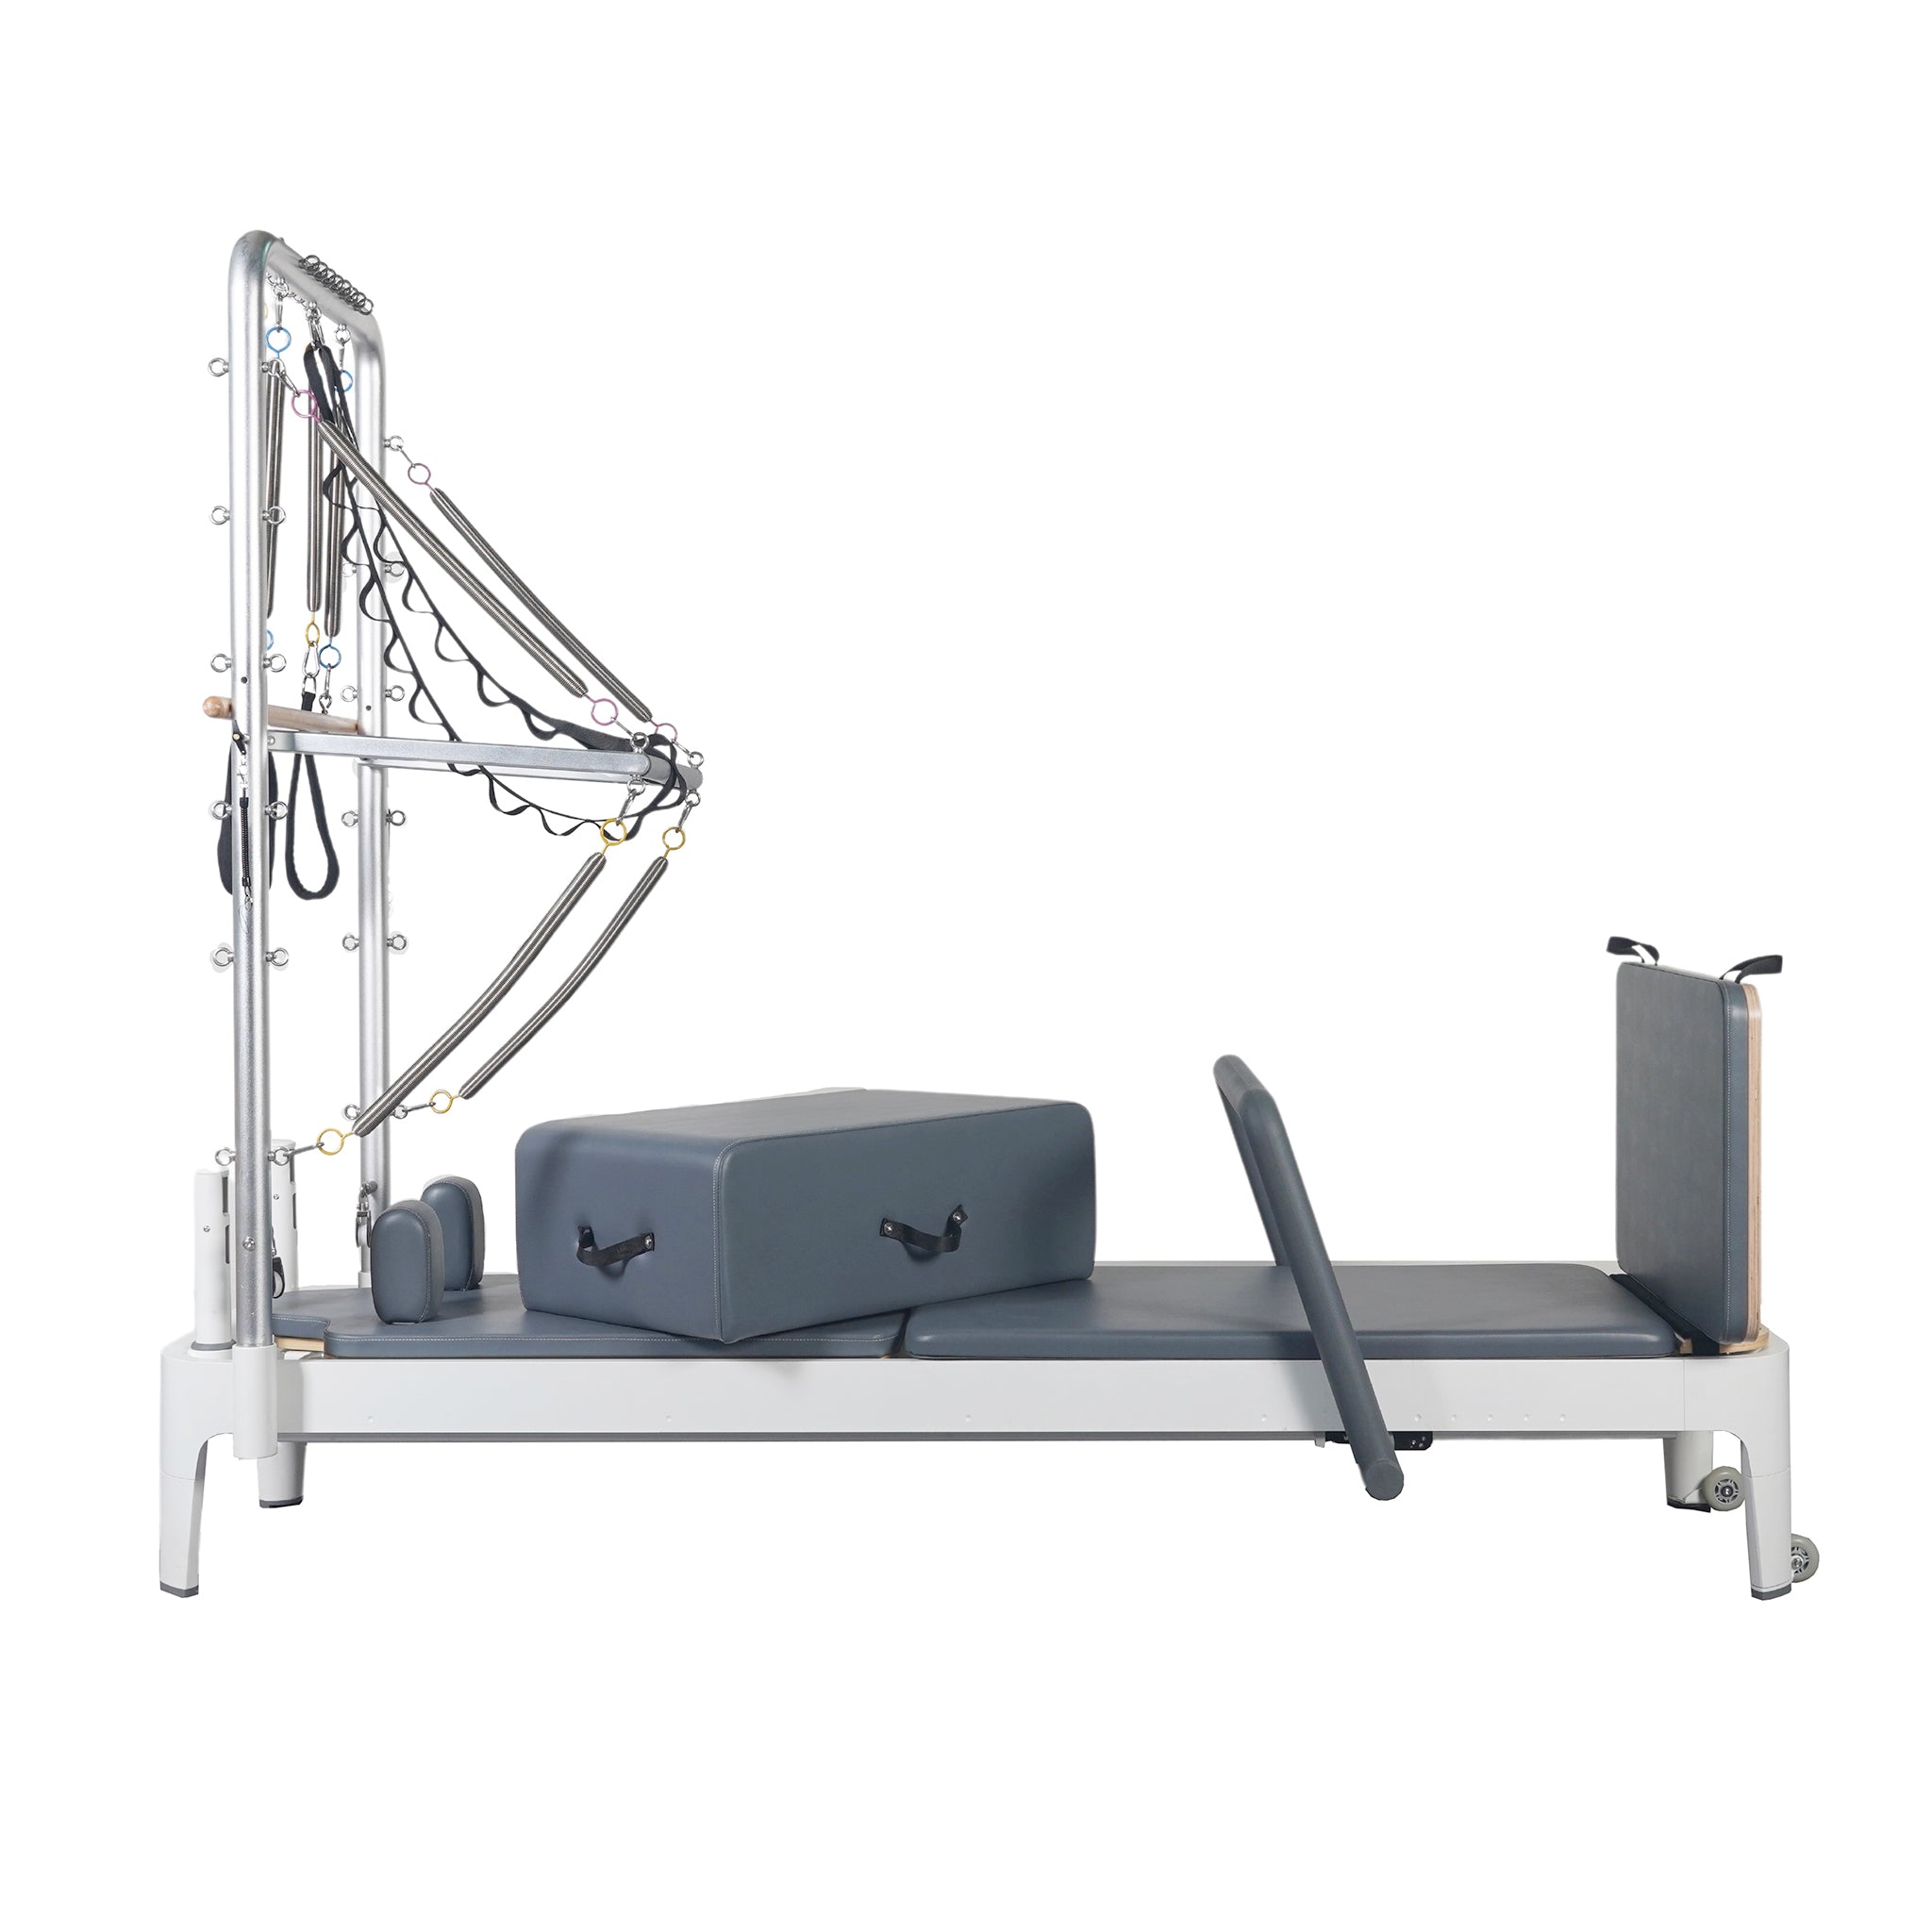 Track Sliding Aluminum Alloy Pilates Reformer With Tower